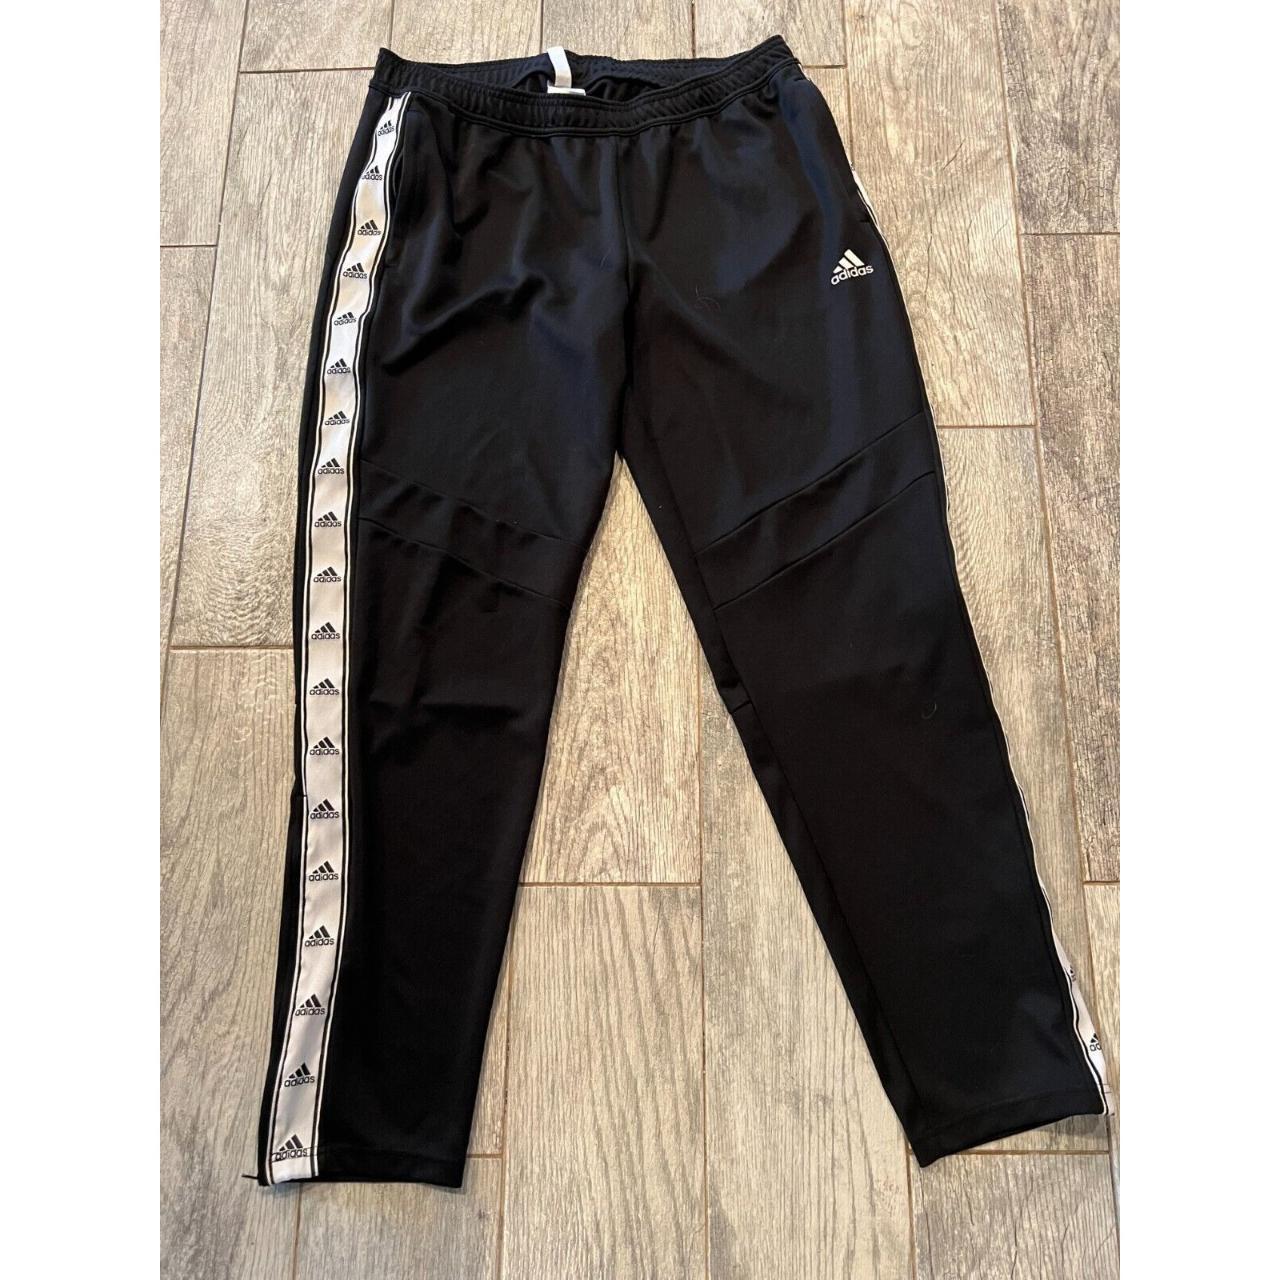 Adidas Blue Classic Baggy Sweatpants & Joggers | Size XL - Rock It! Resell  - Family Consignment